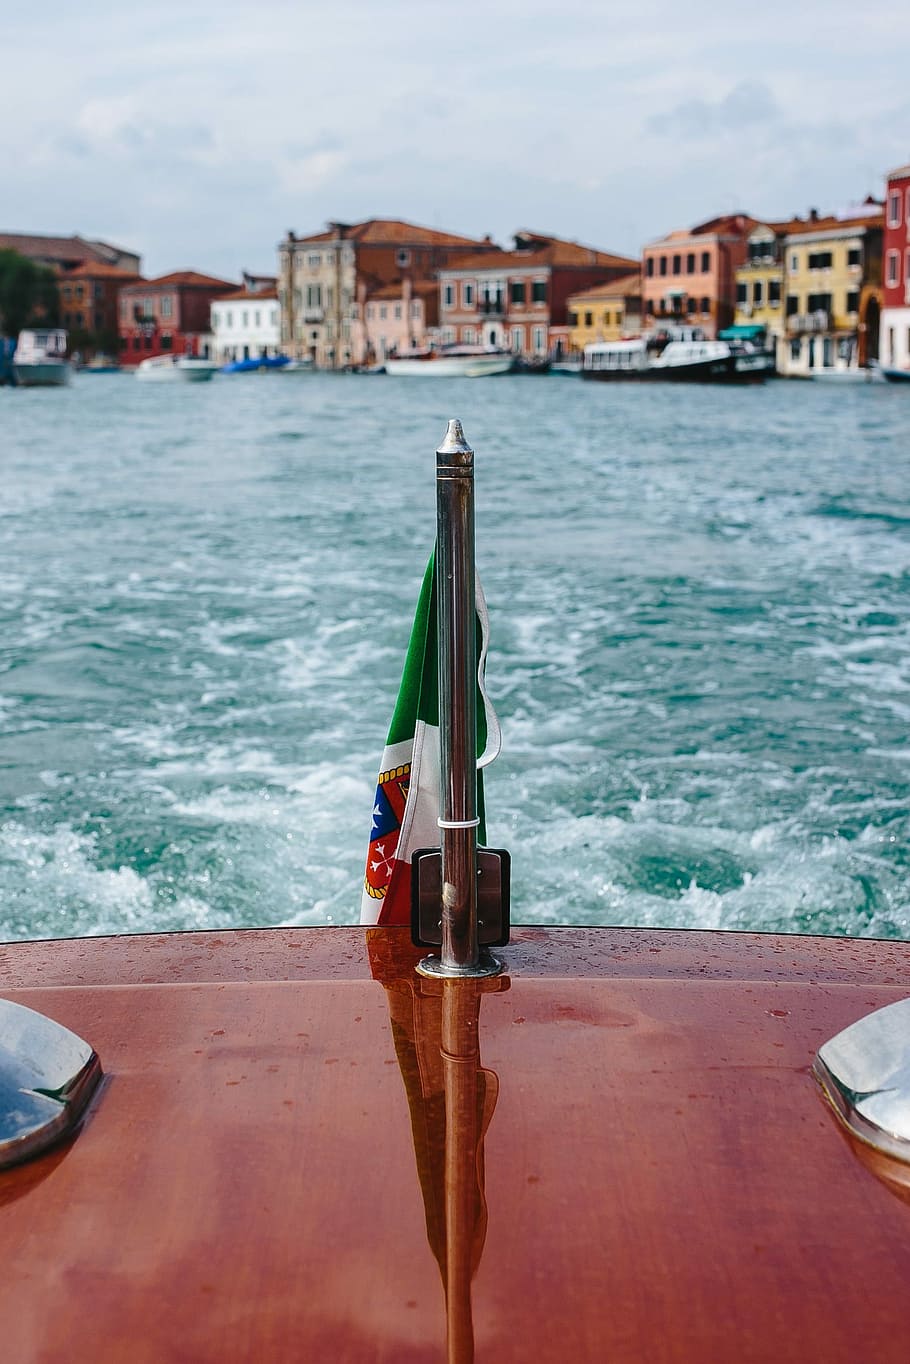 From The Boat On My Way To The Islands Of Murano, Water, - Murano - HD Wallpaper 